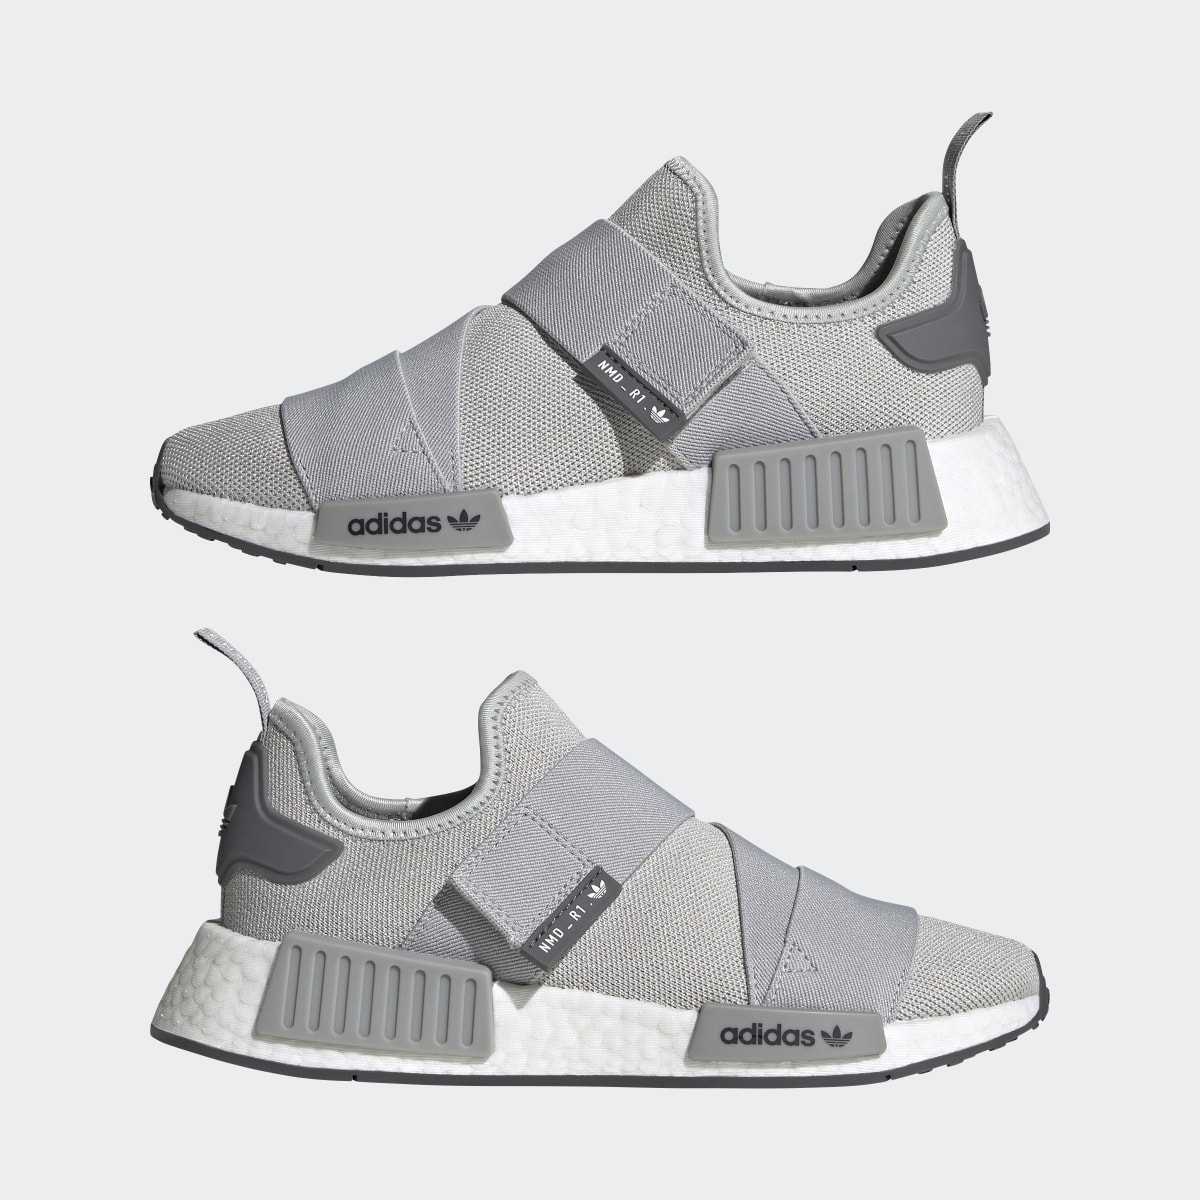 Adidas NMD_R1 Strap Shoes. 11